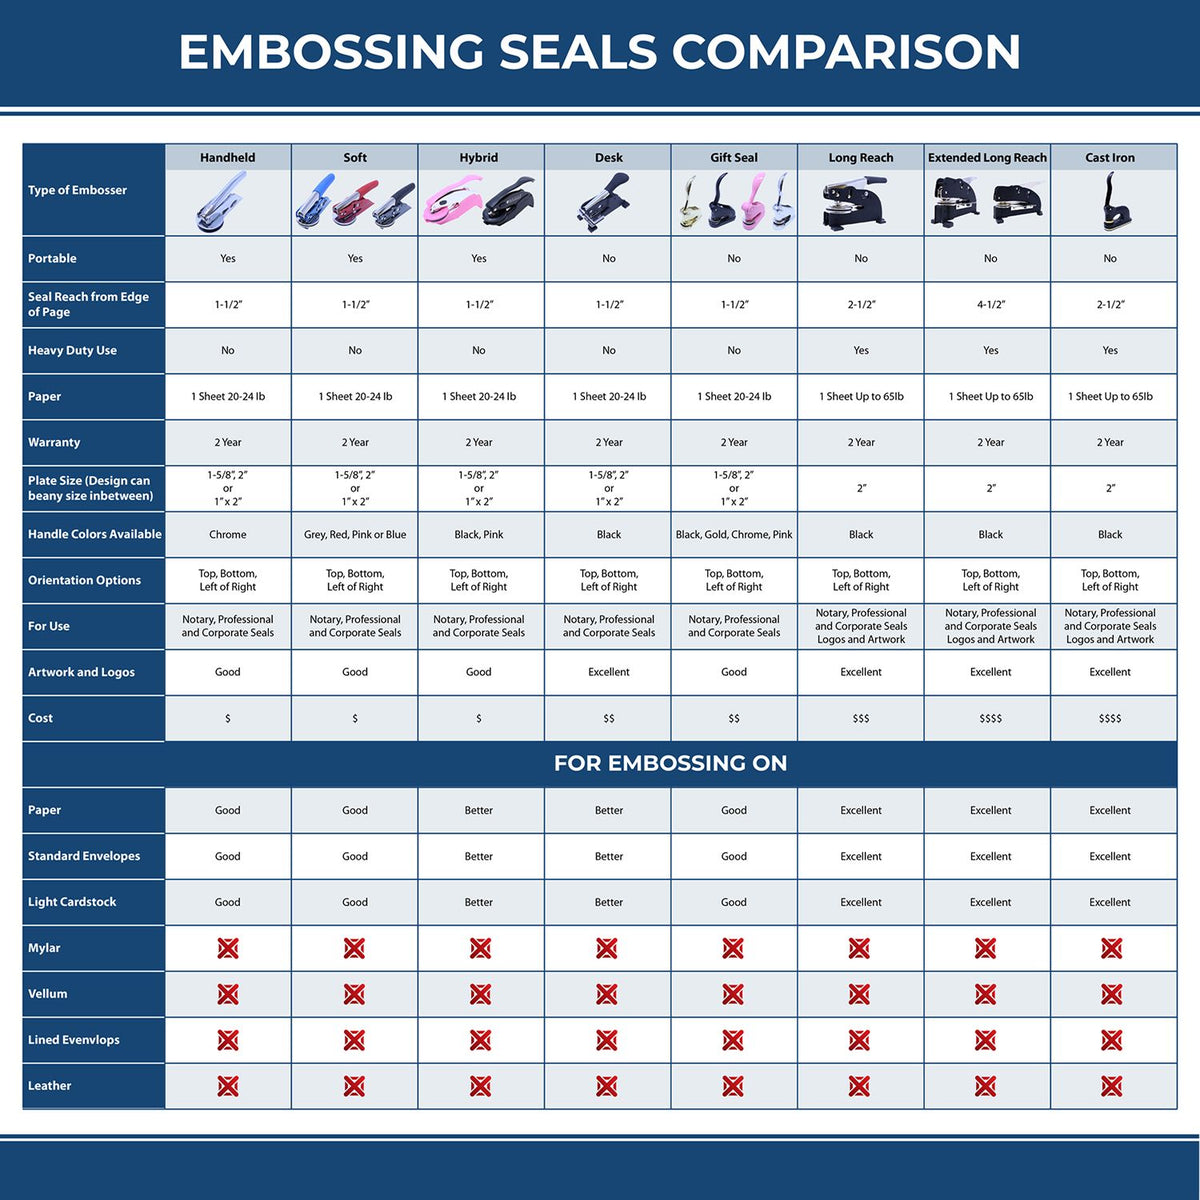 A comparison chart for the different types of mount models available for the Heavy Duty Cast Iron Alabama Engineer Seal Embosser.